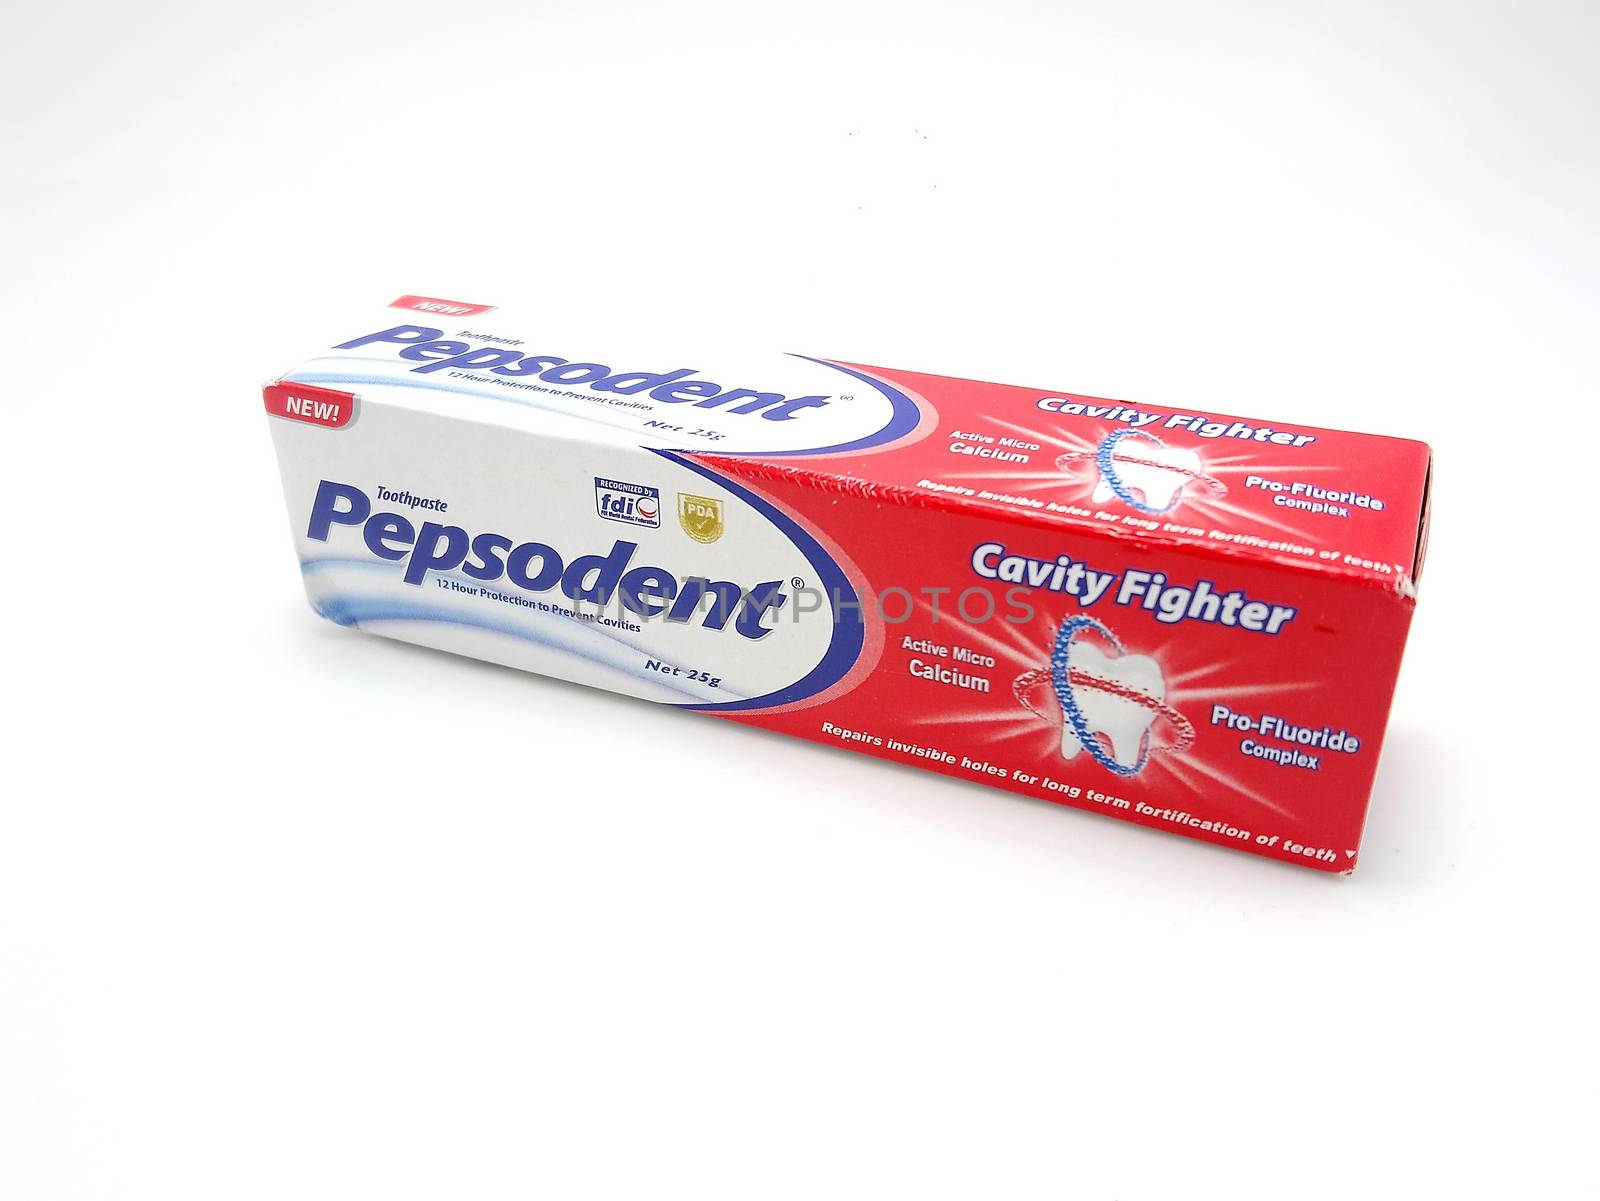 Pepsodent toothpaste box in Manila, Philippines by imwaltersy